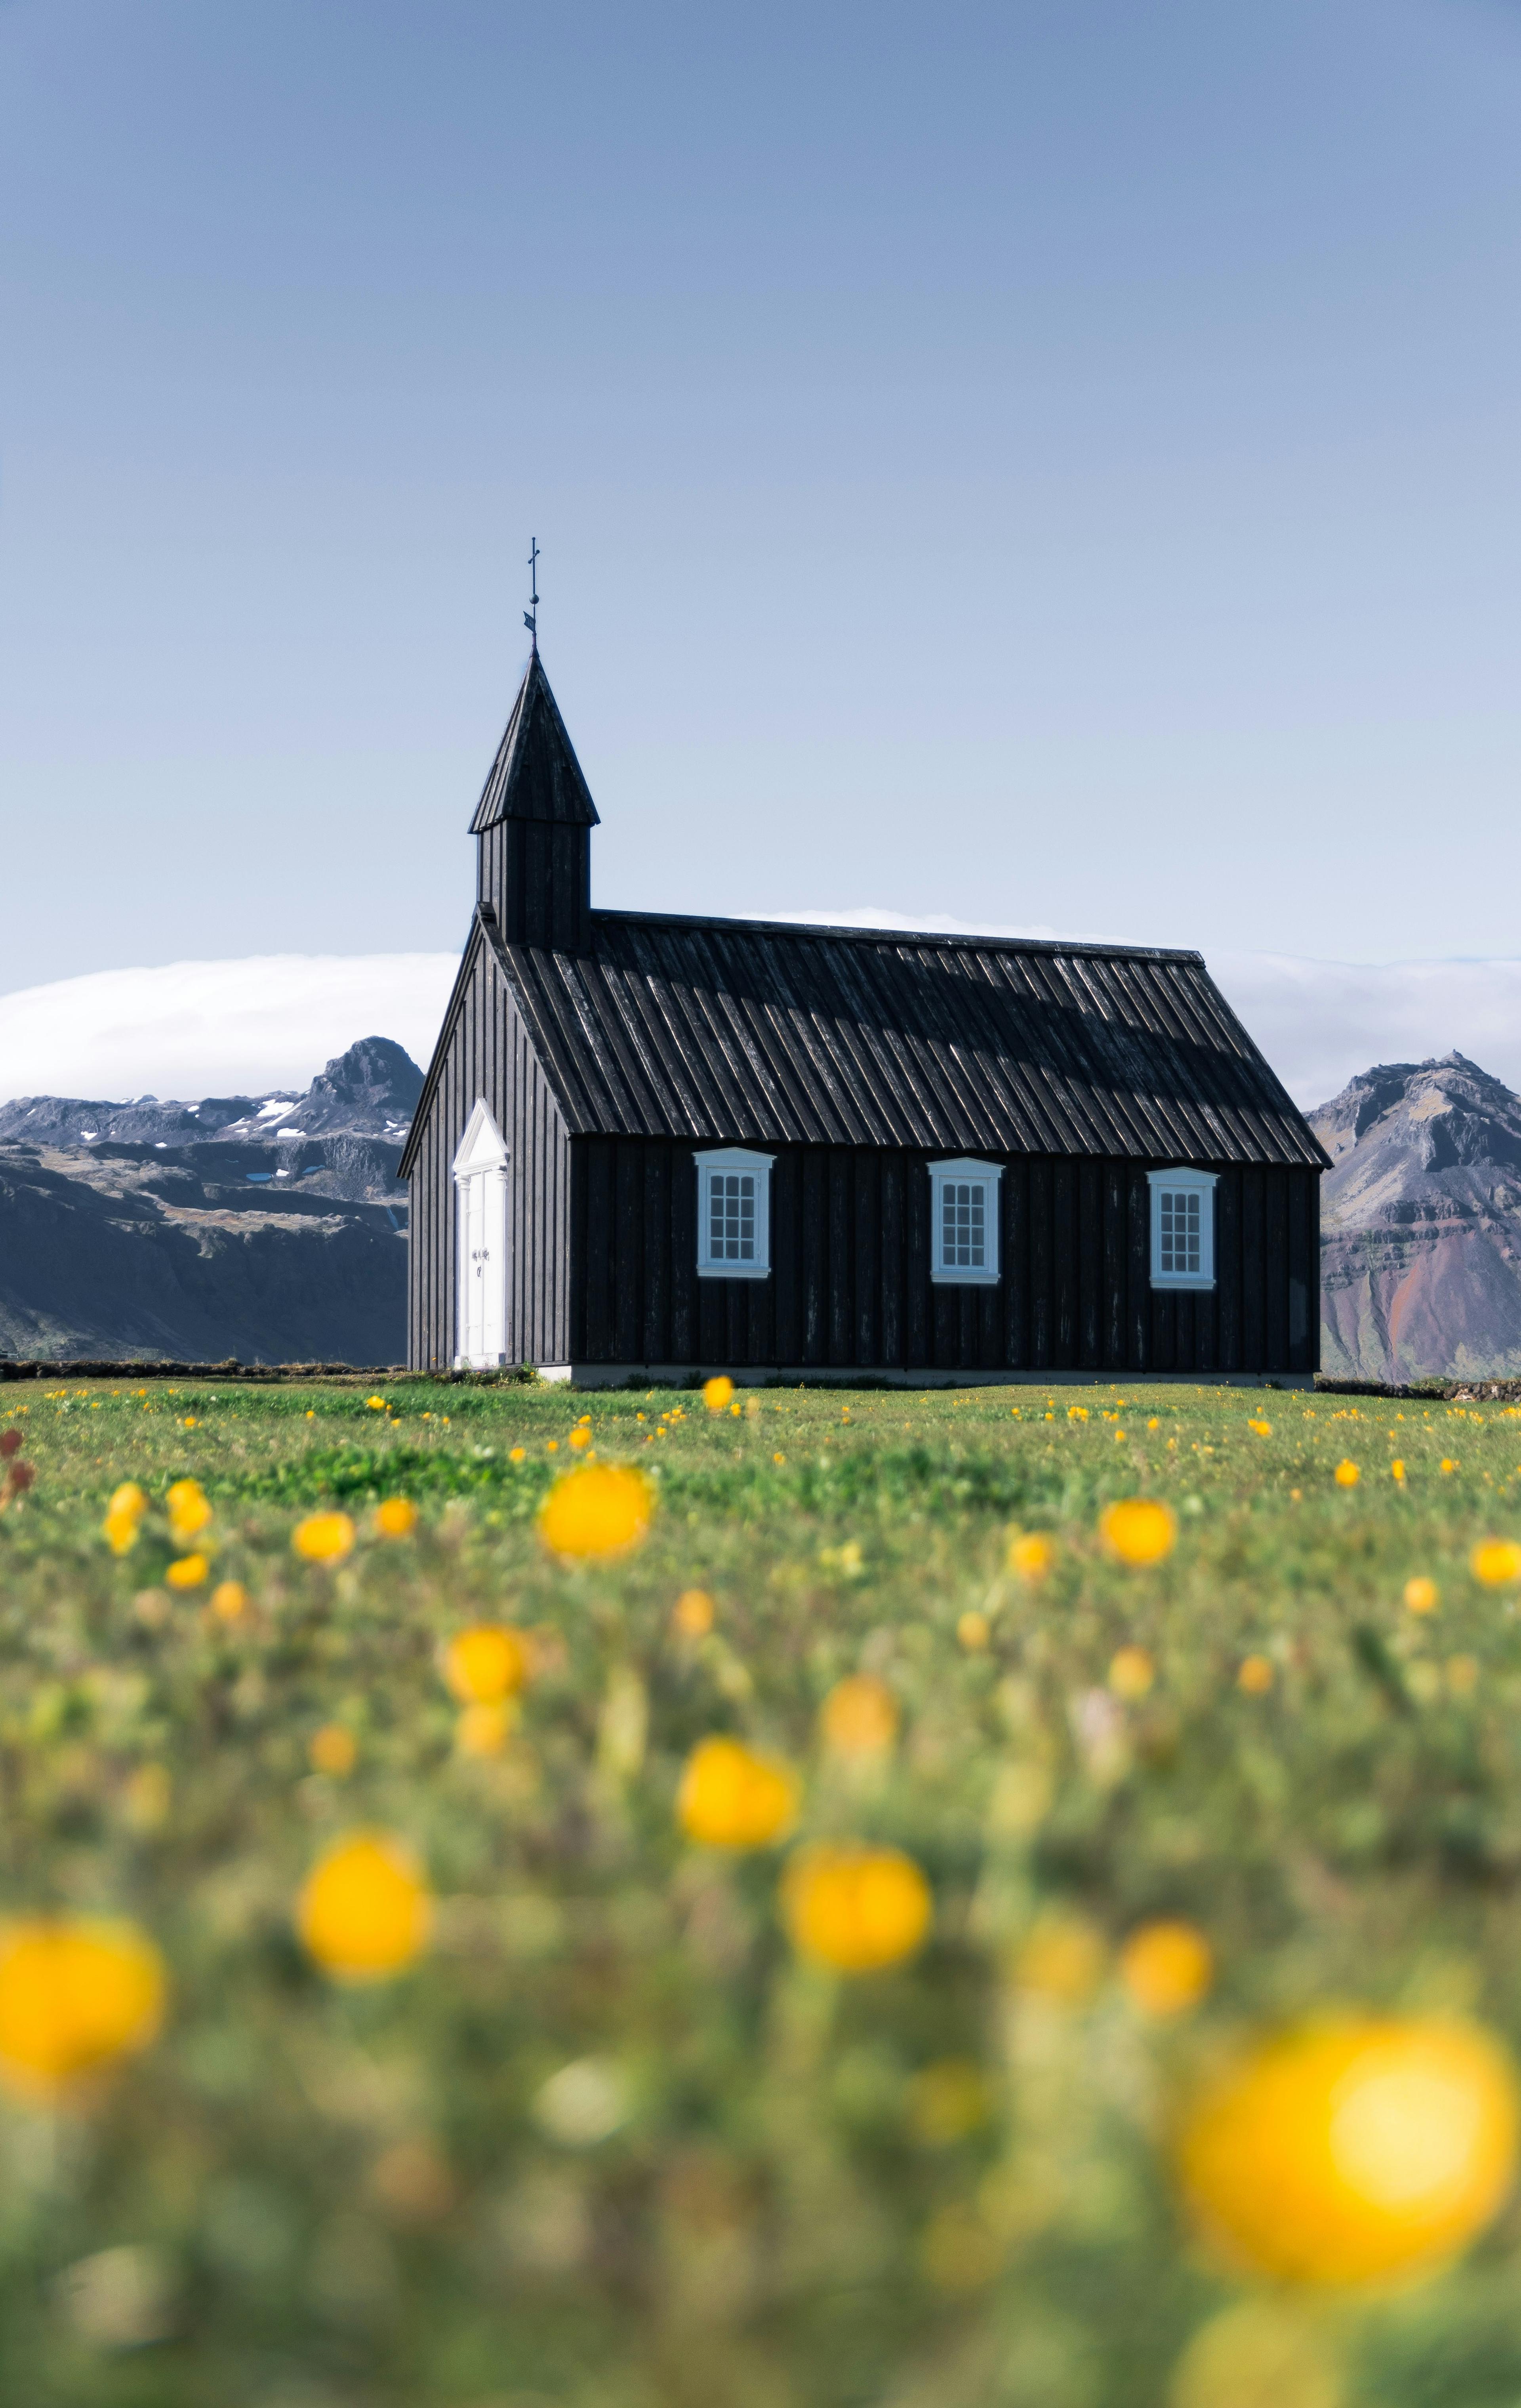 A quaint black church stands amidst a field of yellow flowers, with towering mountains in the background under a clear blue sky.